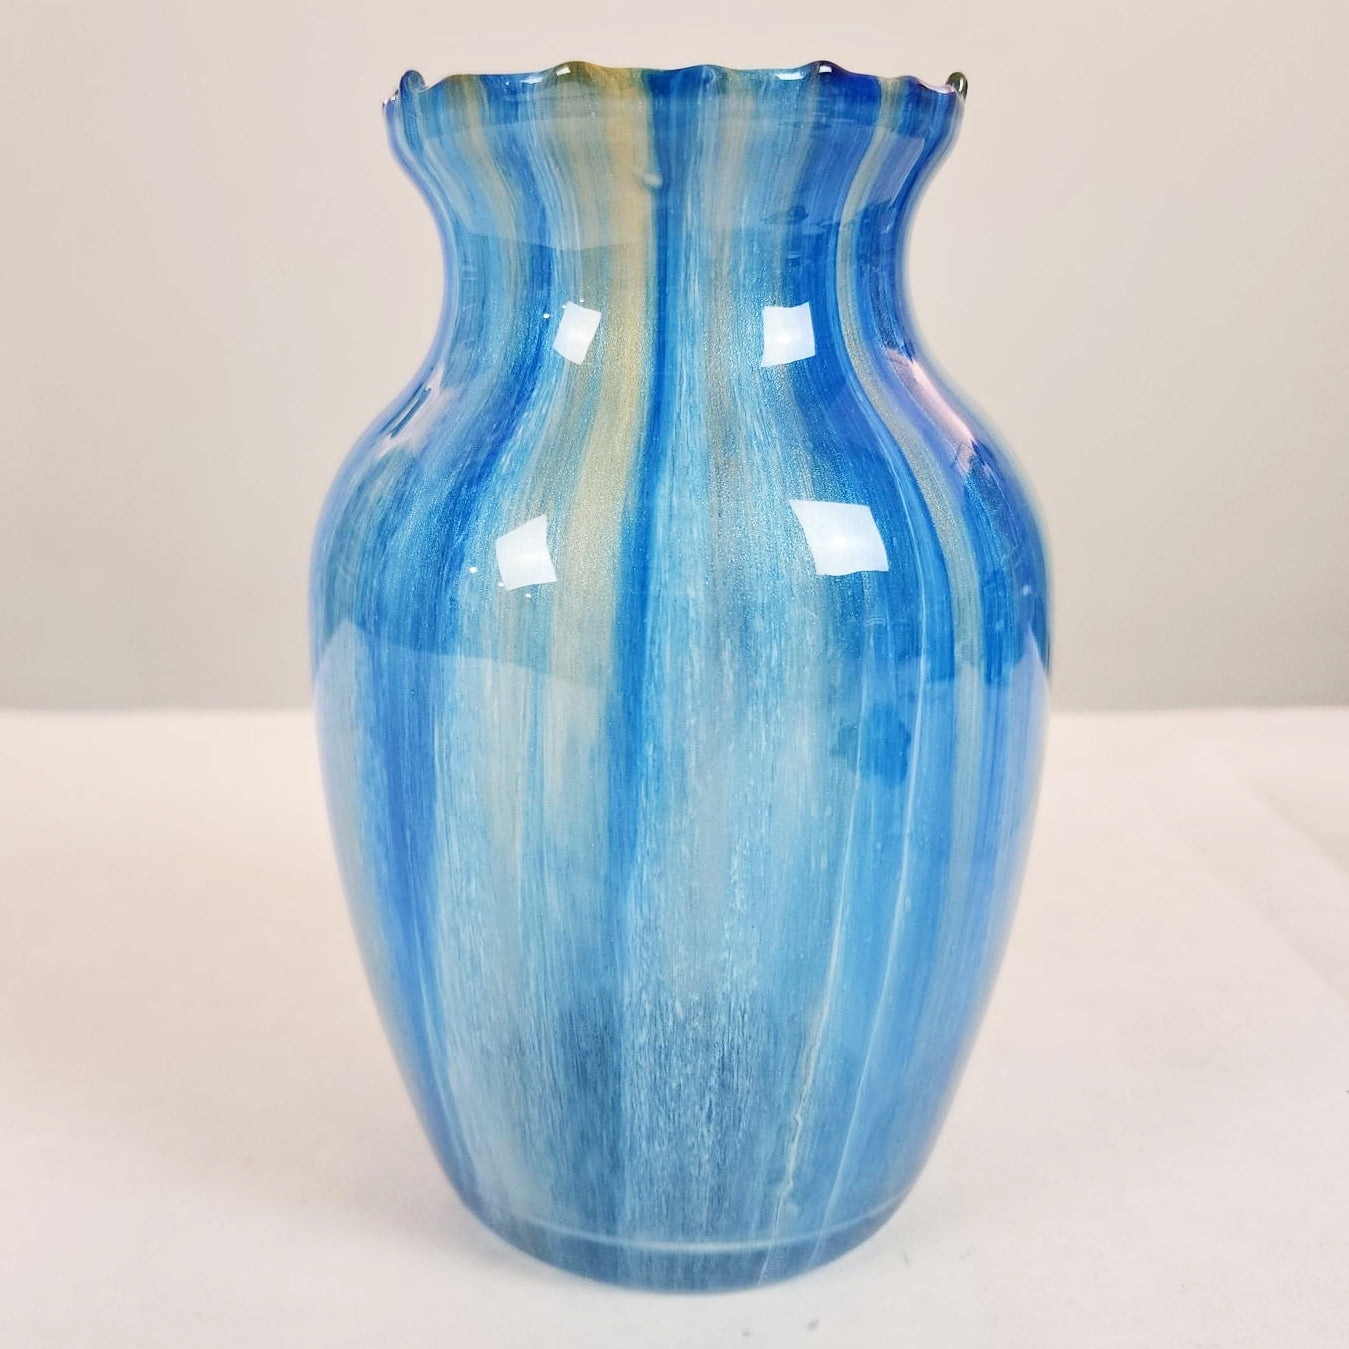 NEW Resin Vase and Bowl Kit and Class